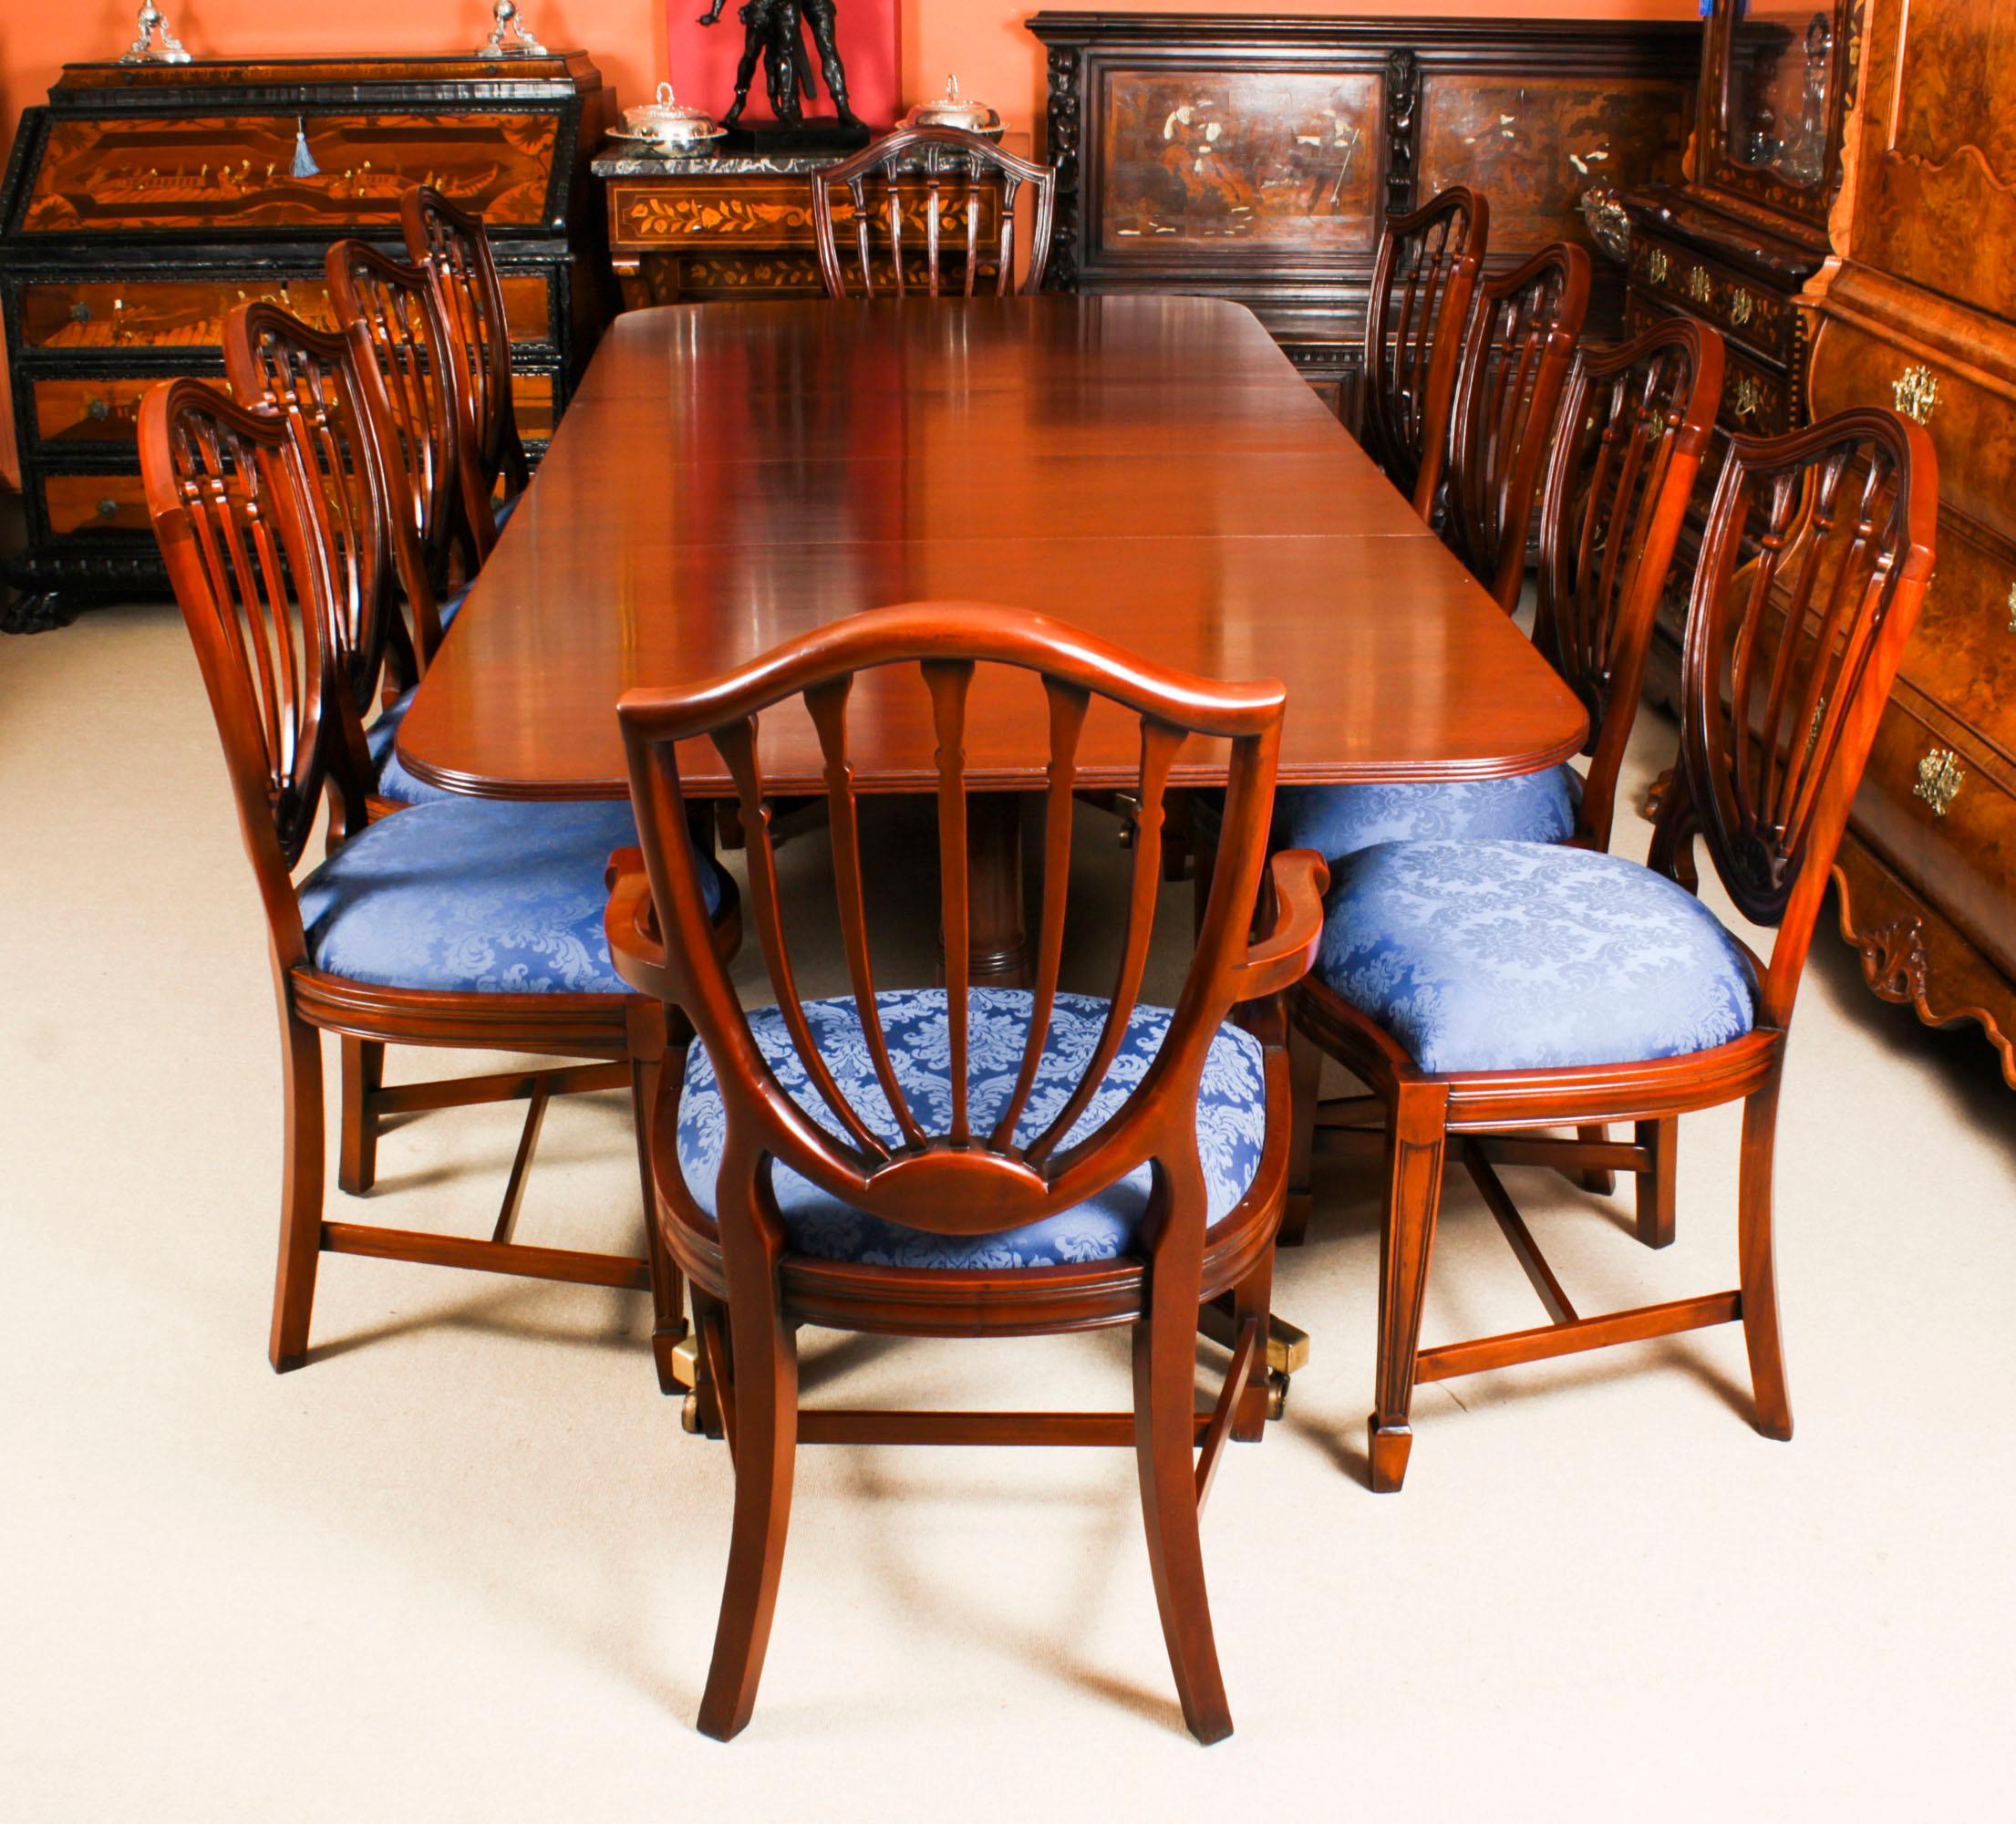 This is a fabulous Vintage Regency Revival dining set comprising a dining table and a set of ten Hepplewhite Revival dining chairs, by William Tillman, Circa 1975 in date.

The table is made of stunning solid flame mahogany and is raised on twin